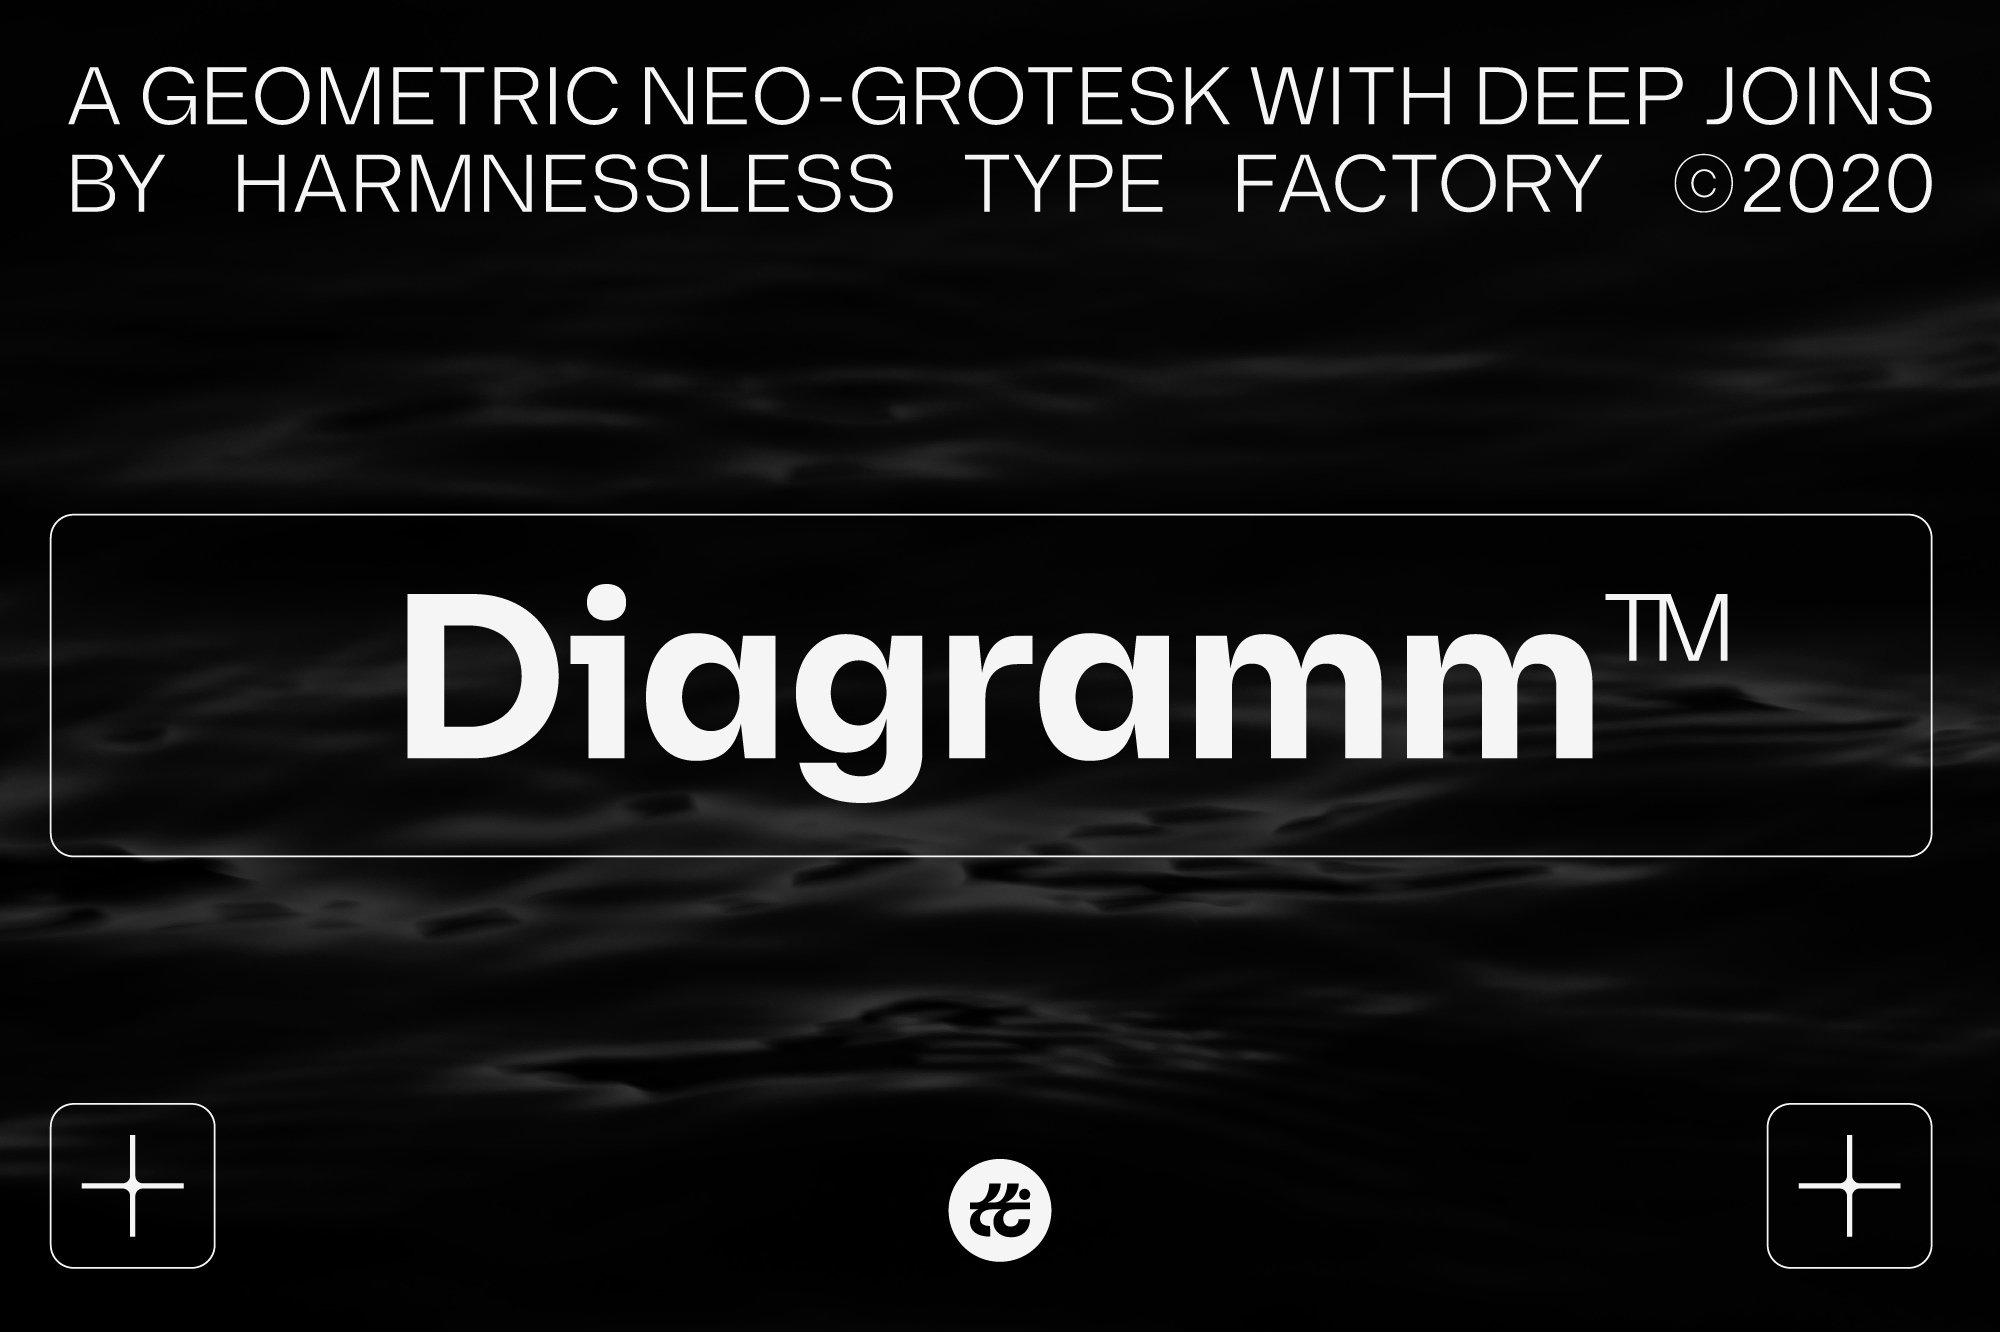 80% off - Diagramm Neo-Grotesk cover image.